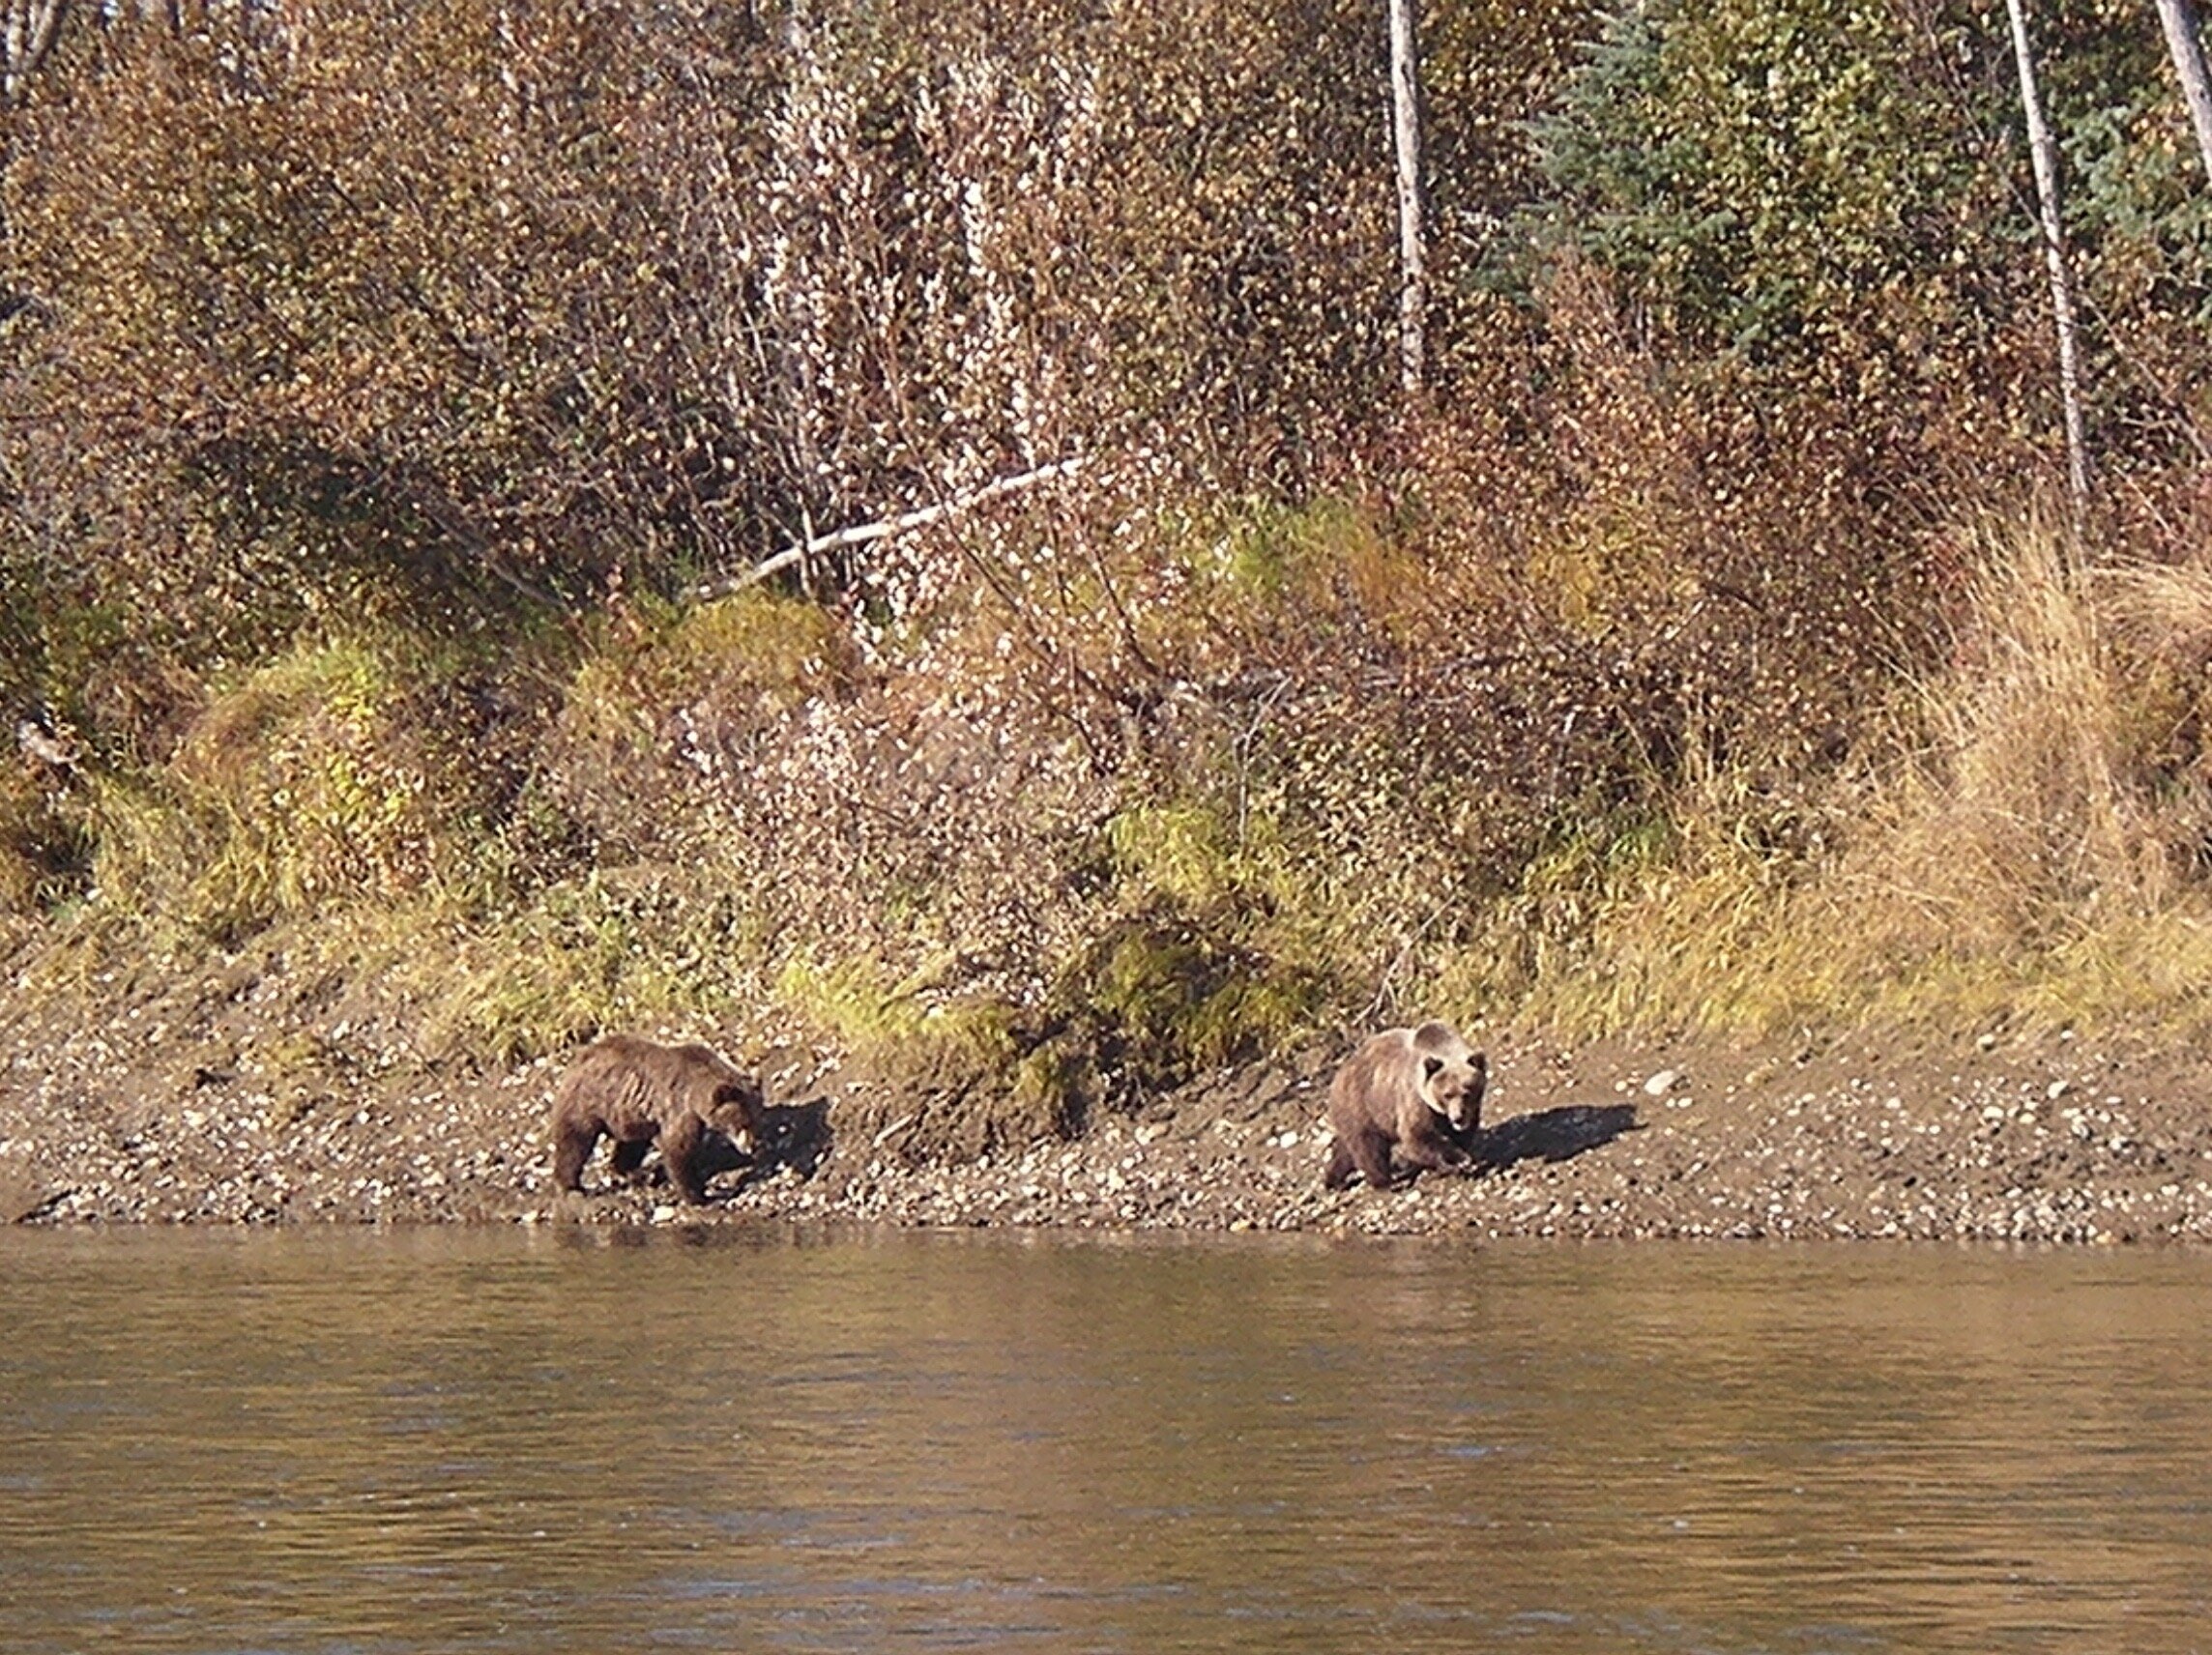 Two grizzly bears walk along the Kobuk River in an early fall snow.